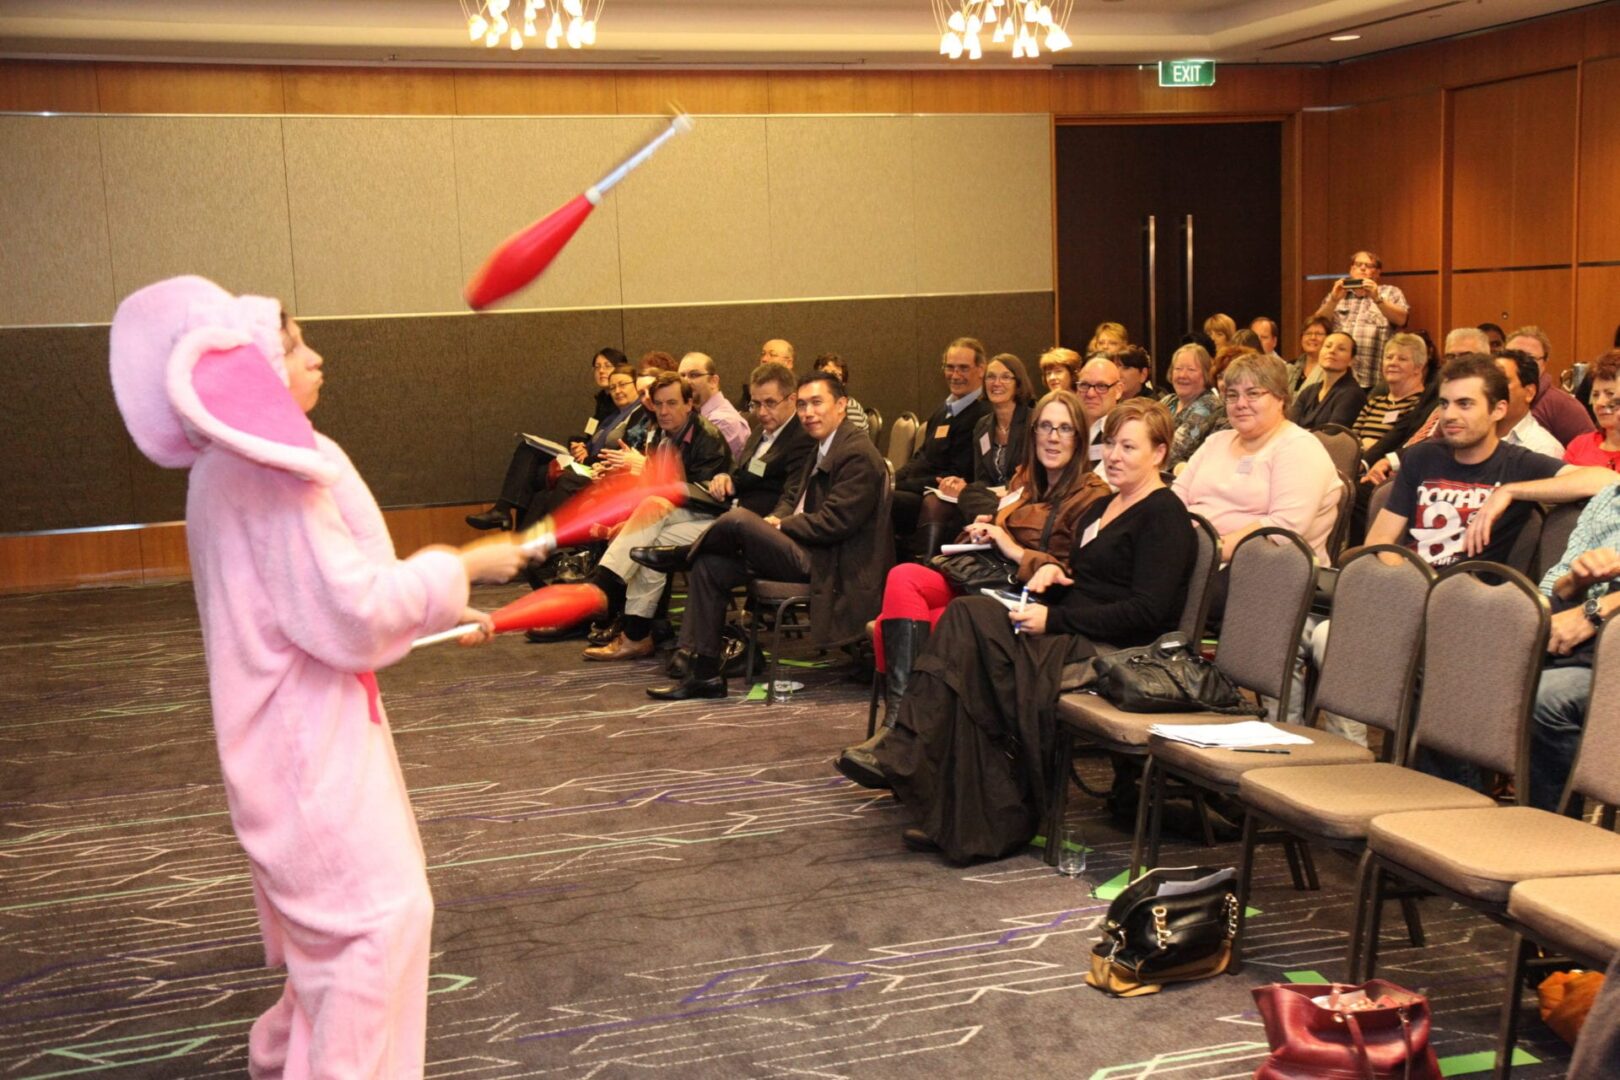 A man in pink is juggling red objects